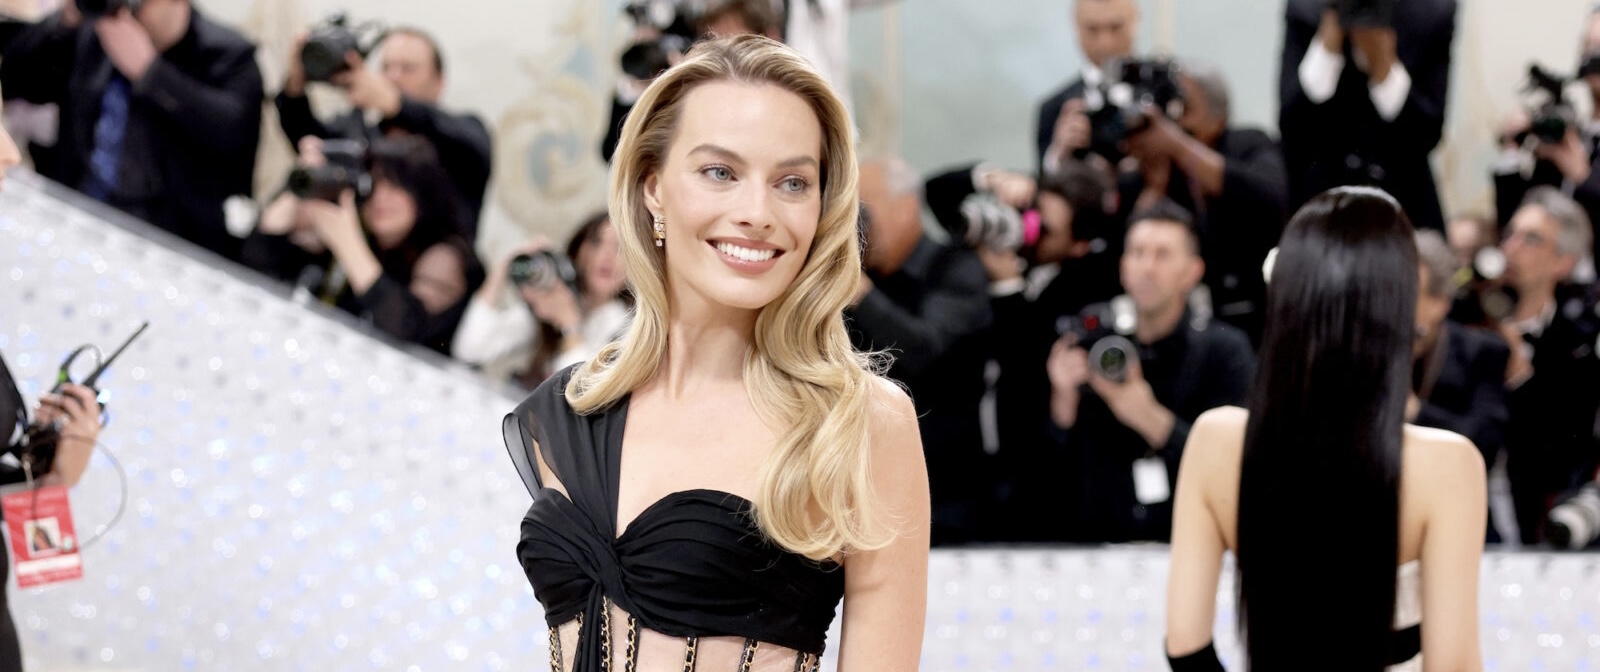 Margot Robbie exudes elegance in a black cut-out gown with golden accents, smiling warmly at a prestigious gala event. Her blonde hair is styled in gentle waves, and her poised demeanor is the epitome of refined style.